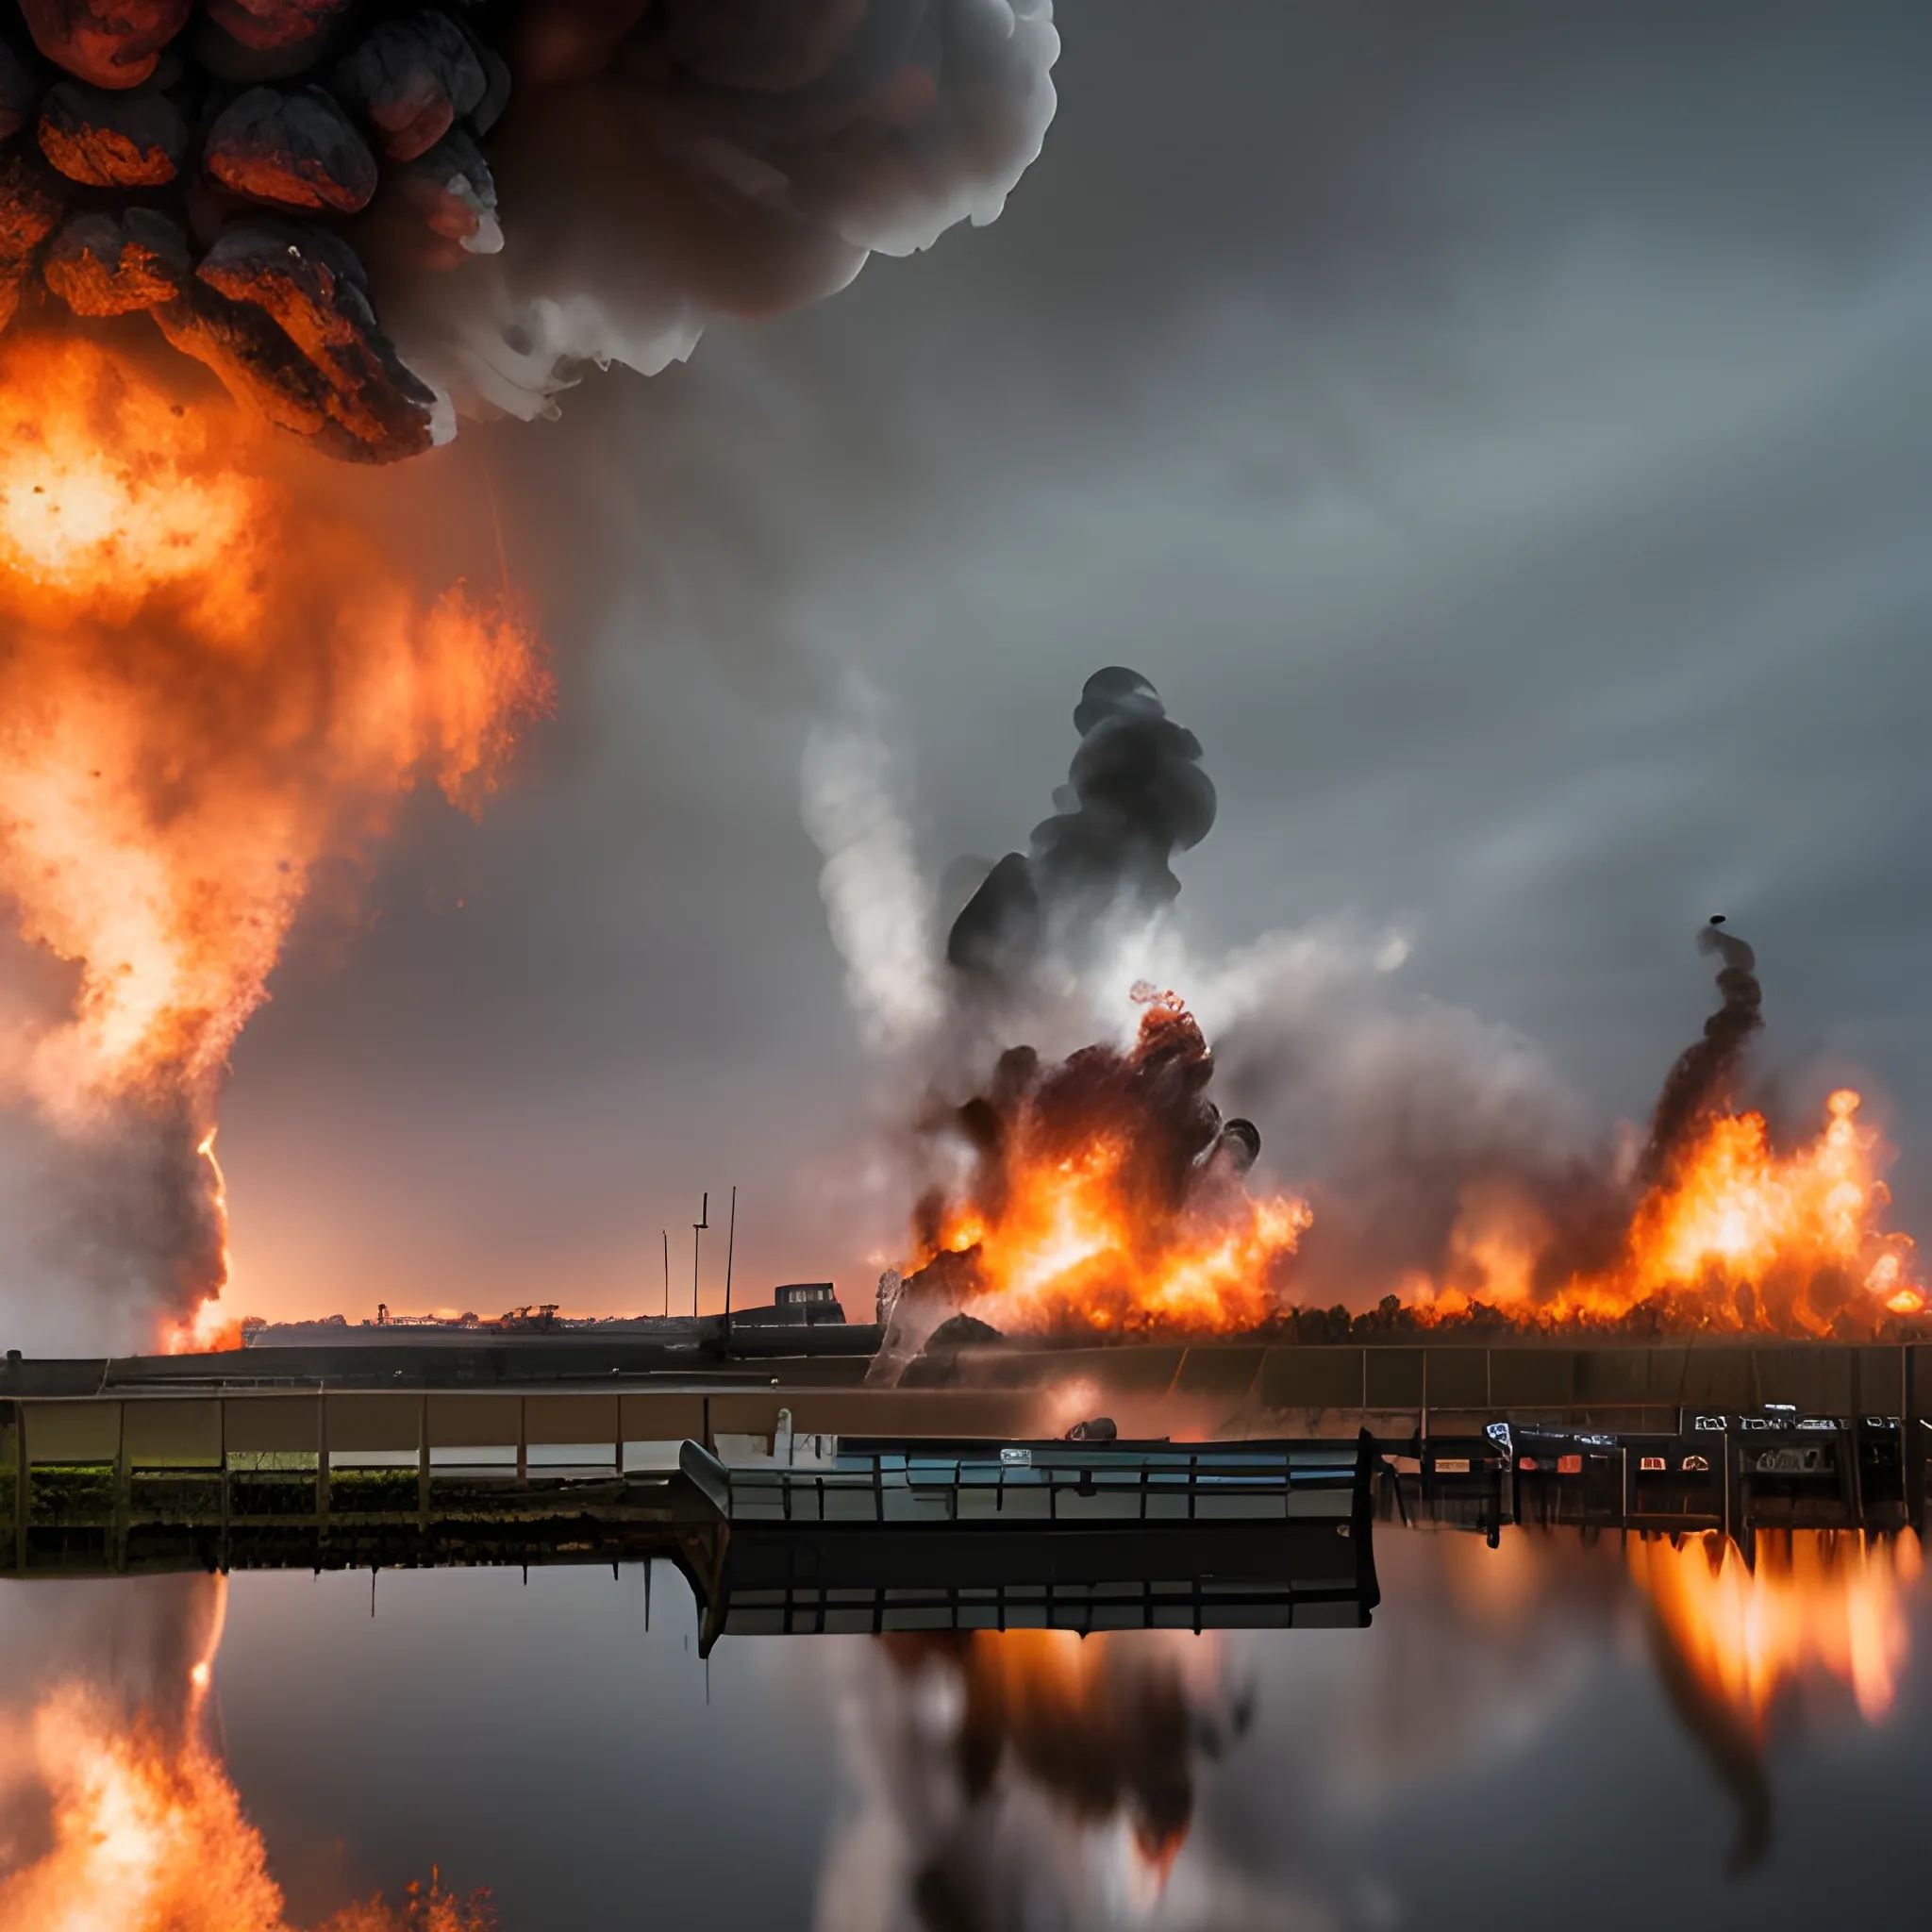 urne explosion, photography